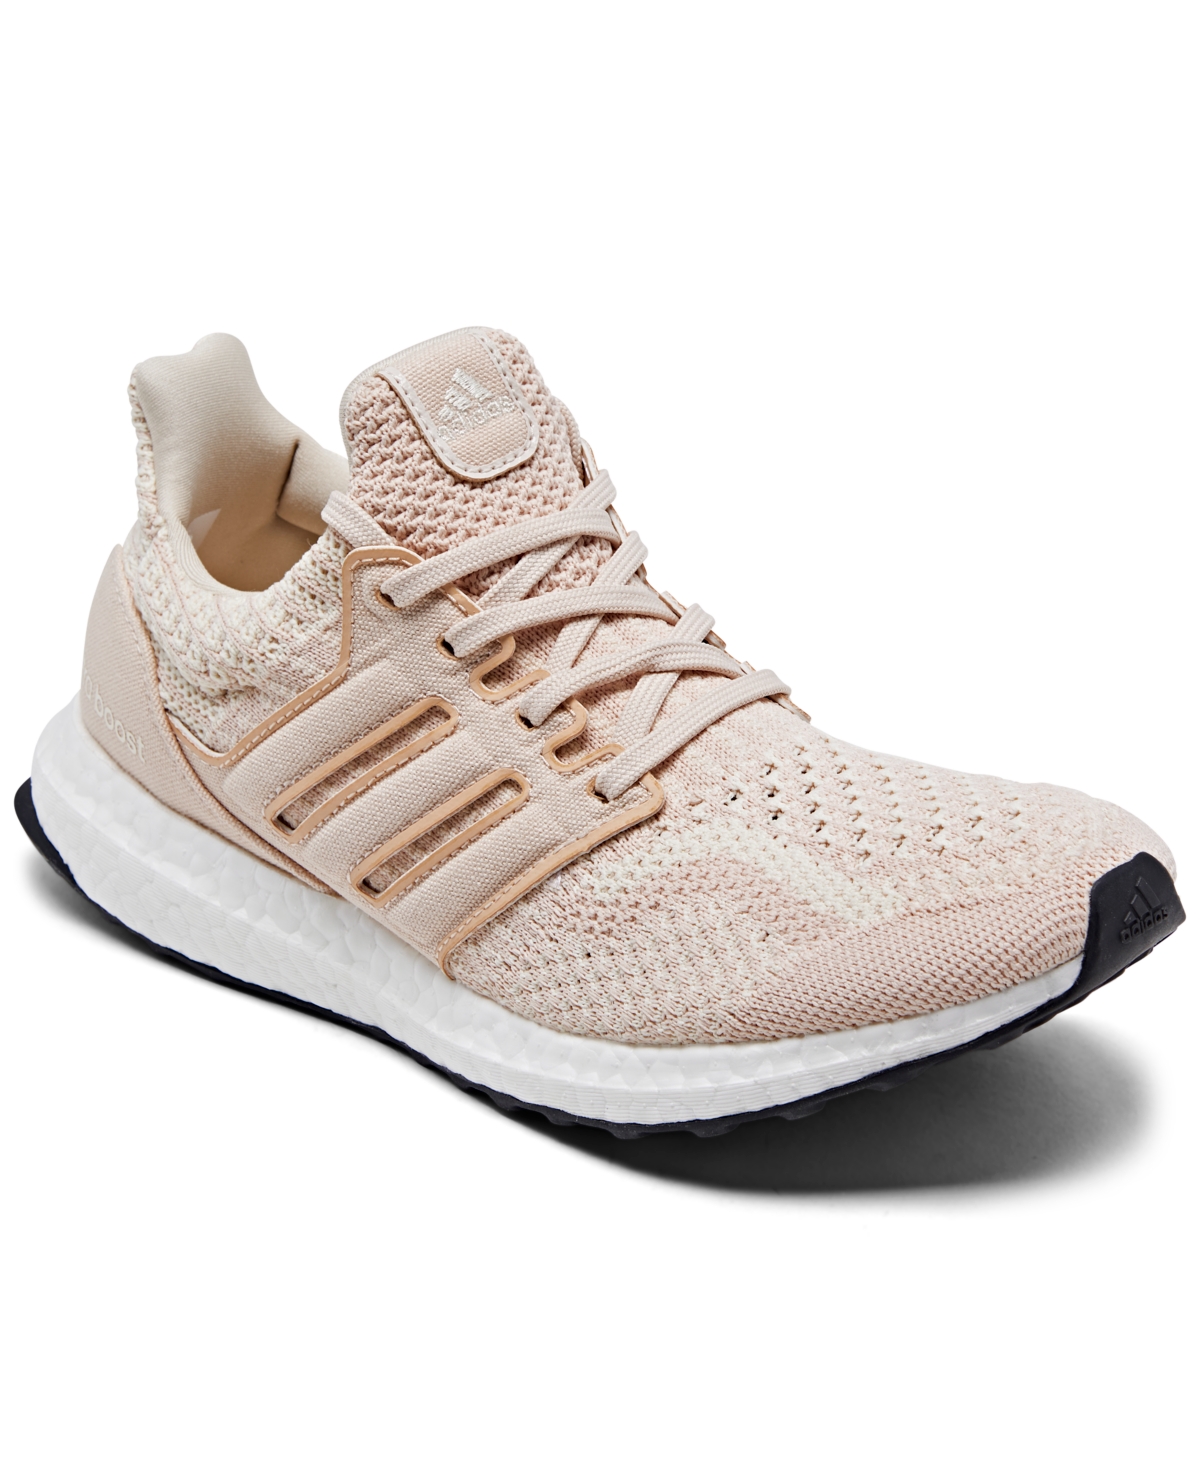 Adidas Originals Adidas Women S Ultra Boost 5 0 Dna Primeblue Running Sneakers From Finish Line In Halo Ivory Cream White Modesens